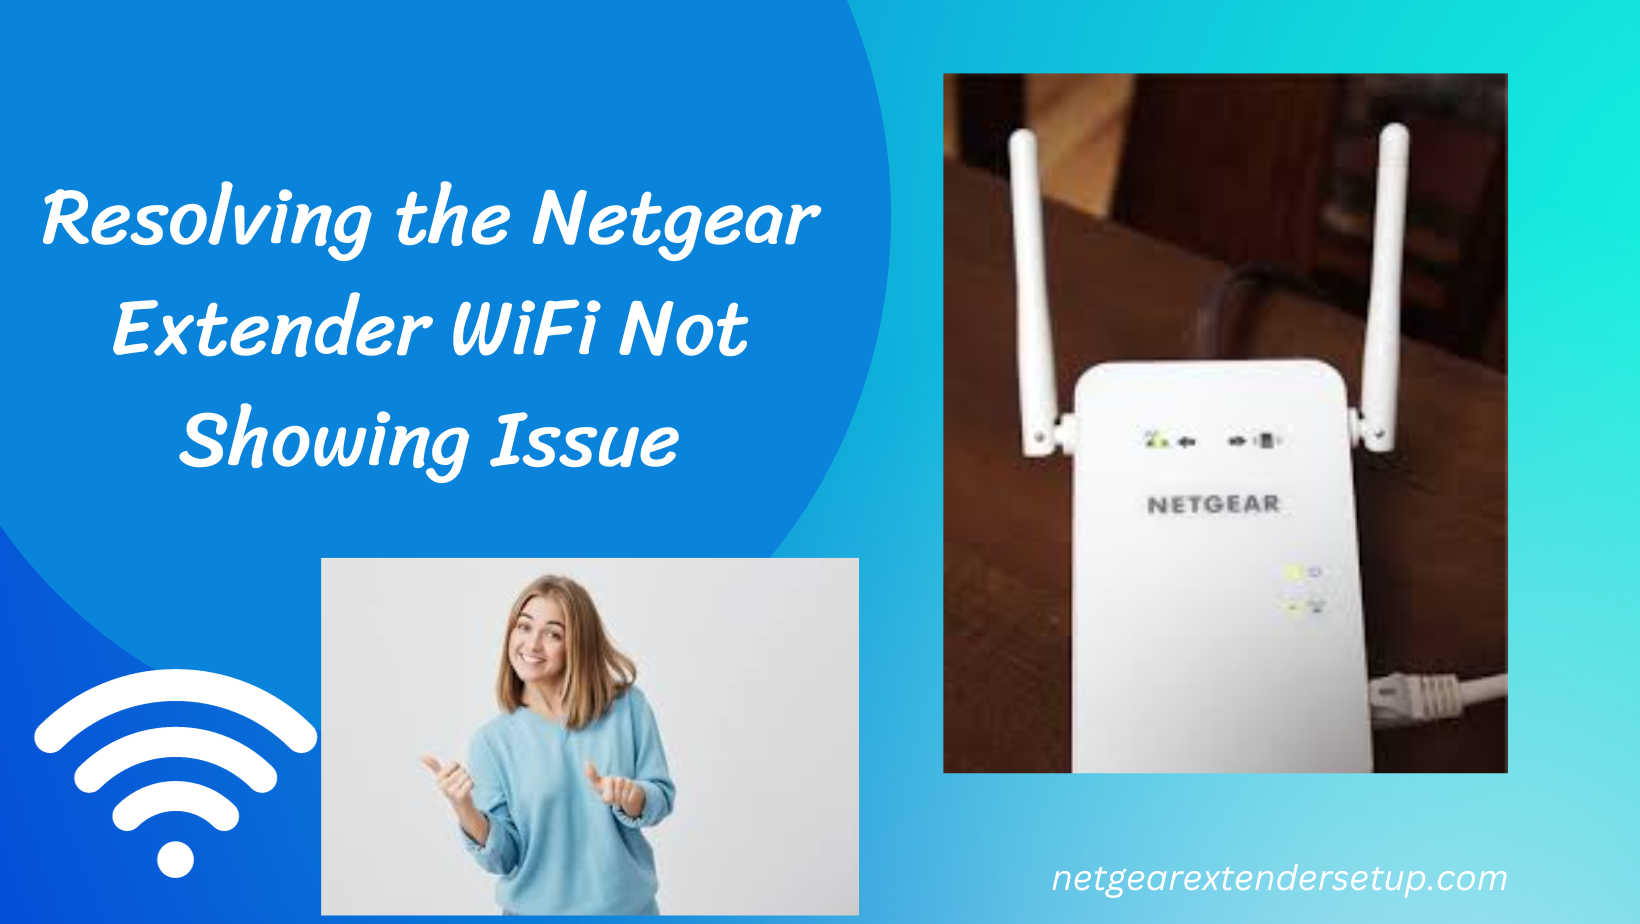 You are currently viewing Resolving the Netgear Extender WiFi Not Showing Issue